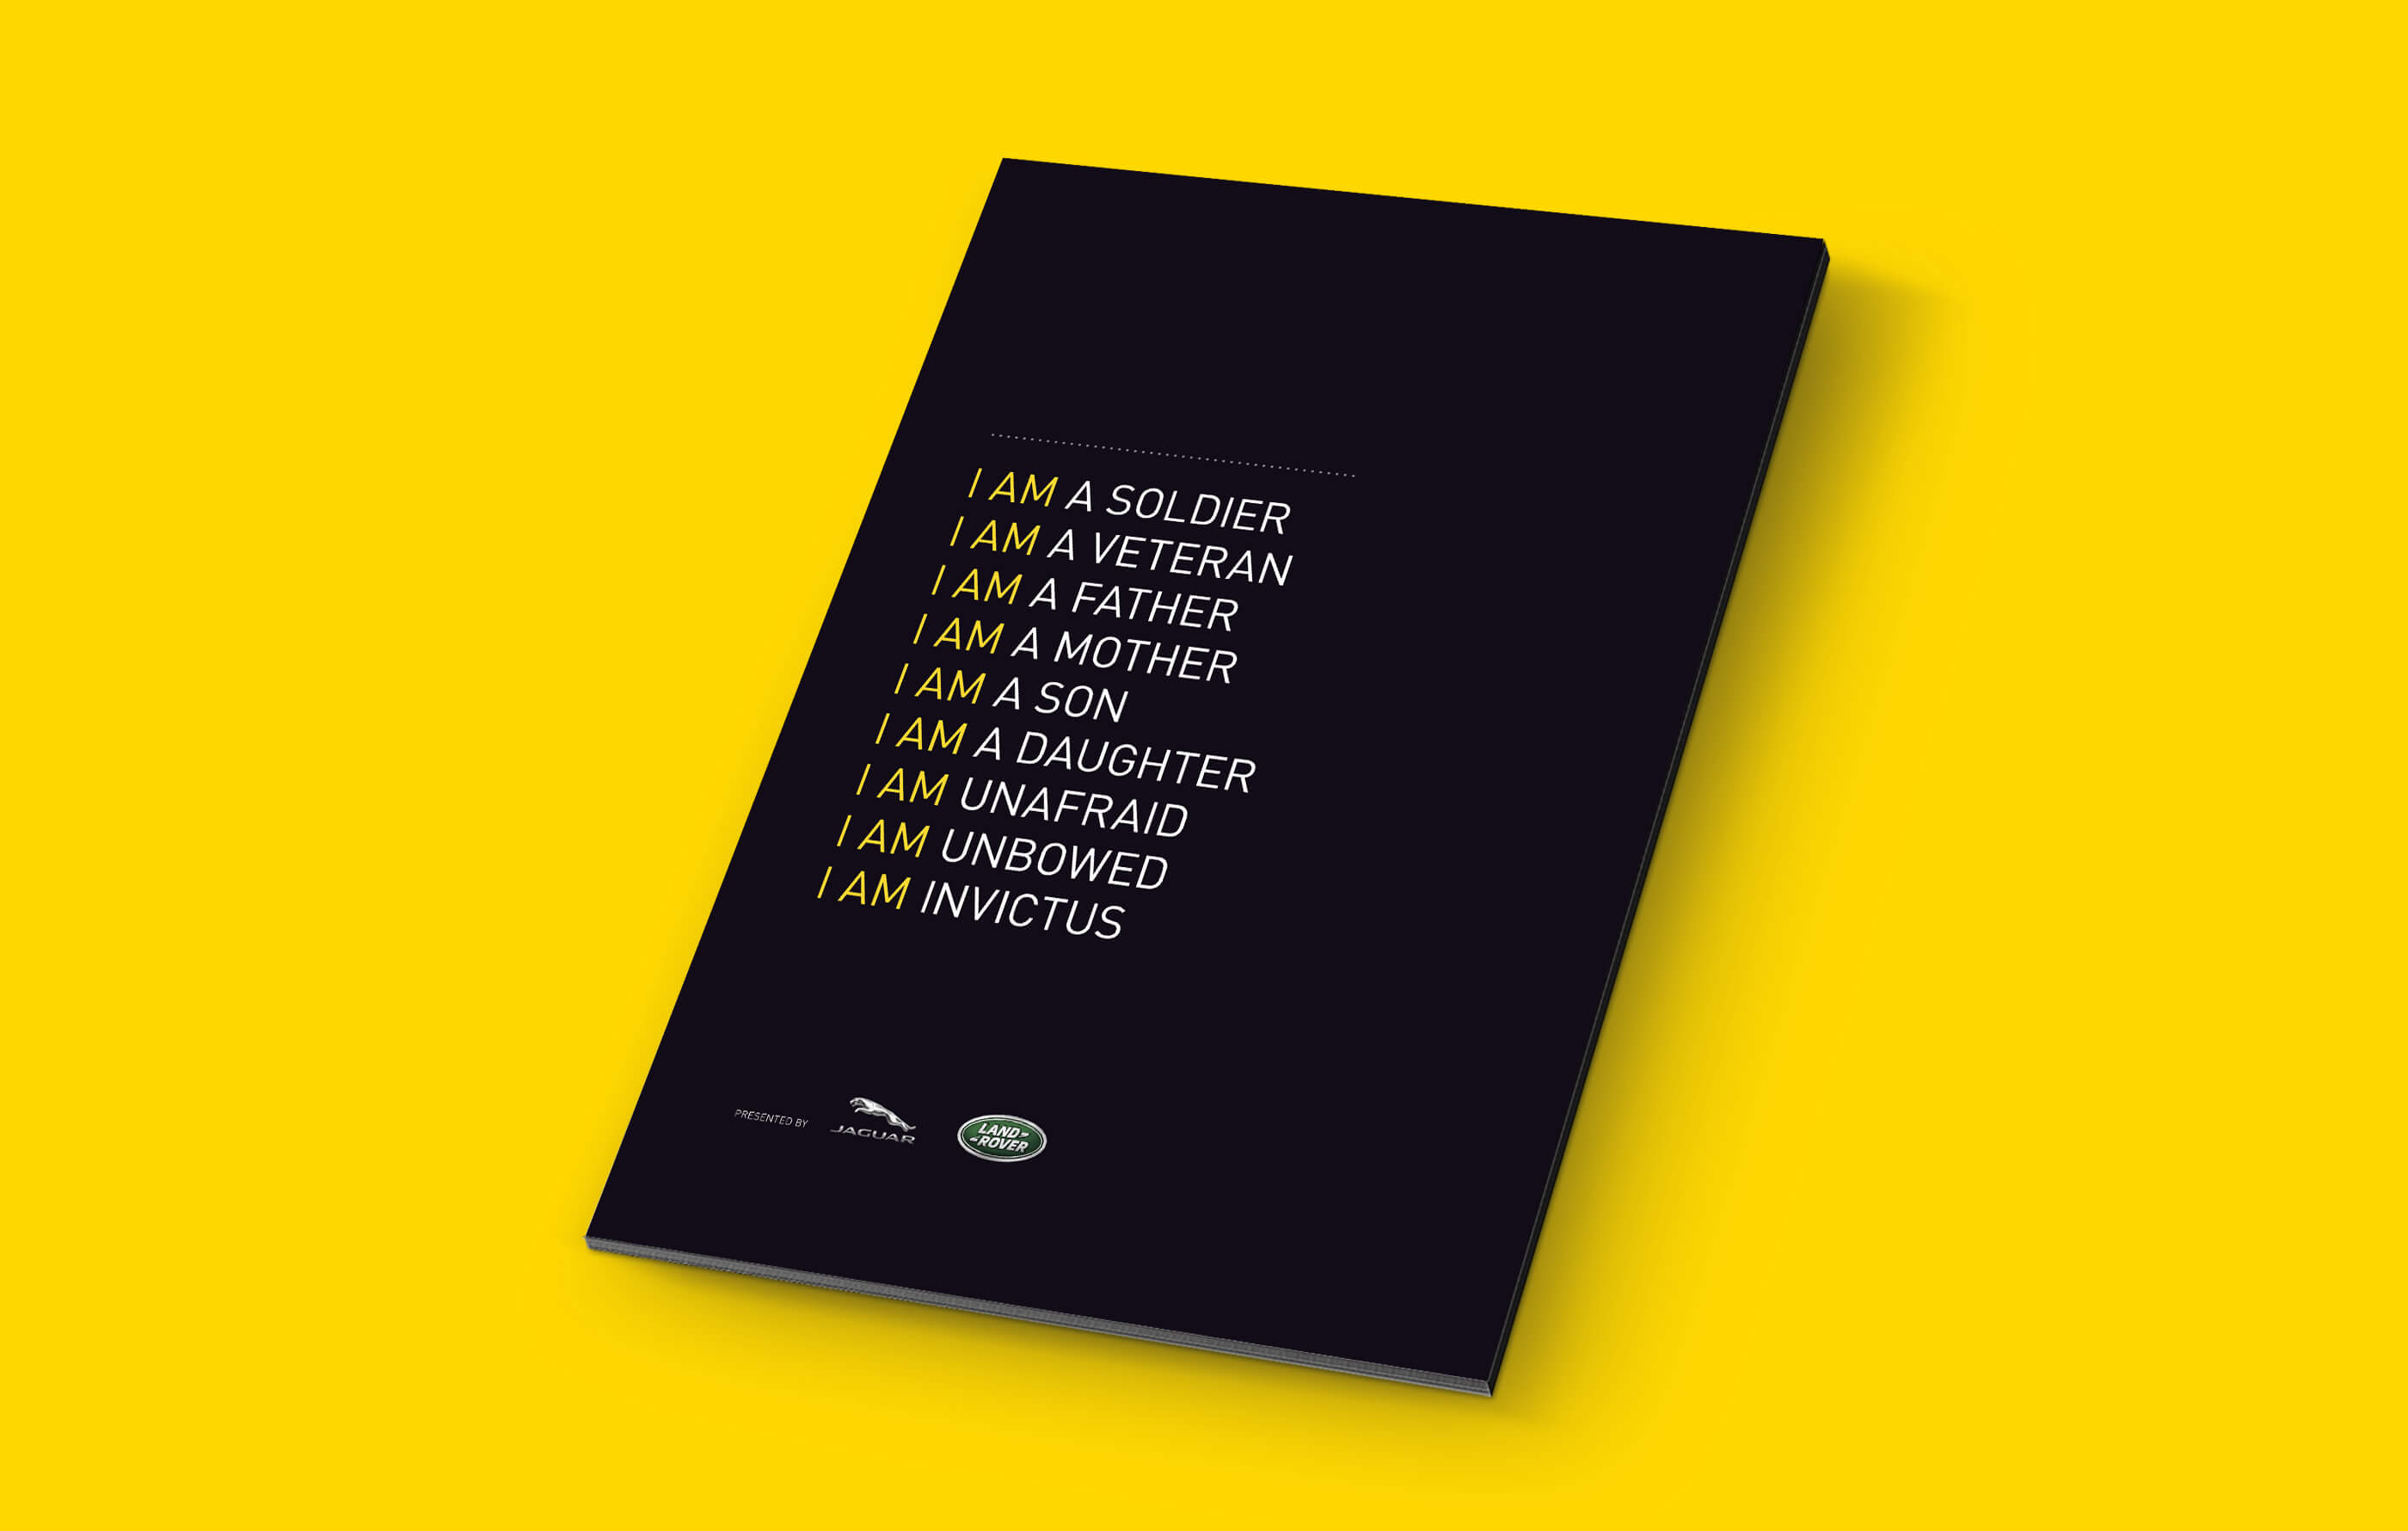 Back cover of the Invictus Games friends and family booklet on a yellow background, featuring the Invictus 'I Am' quote and event sponsor logos